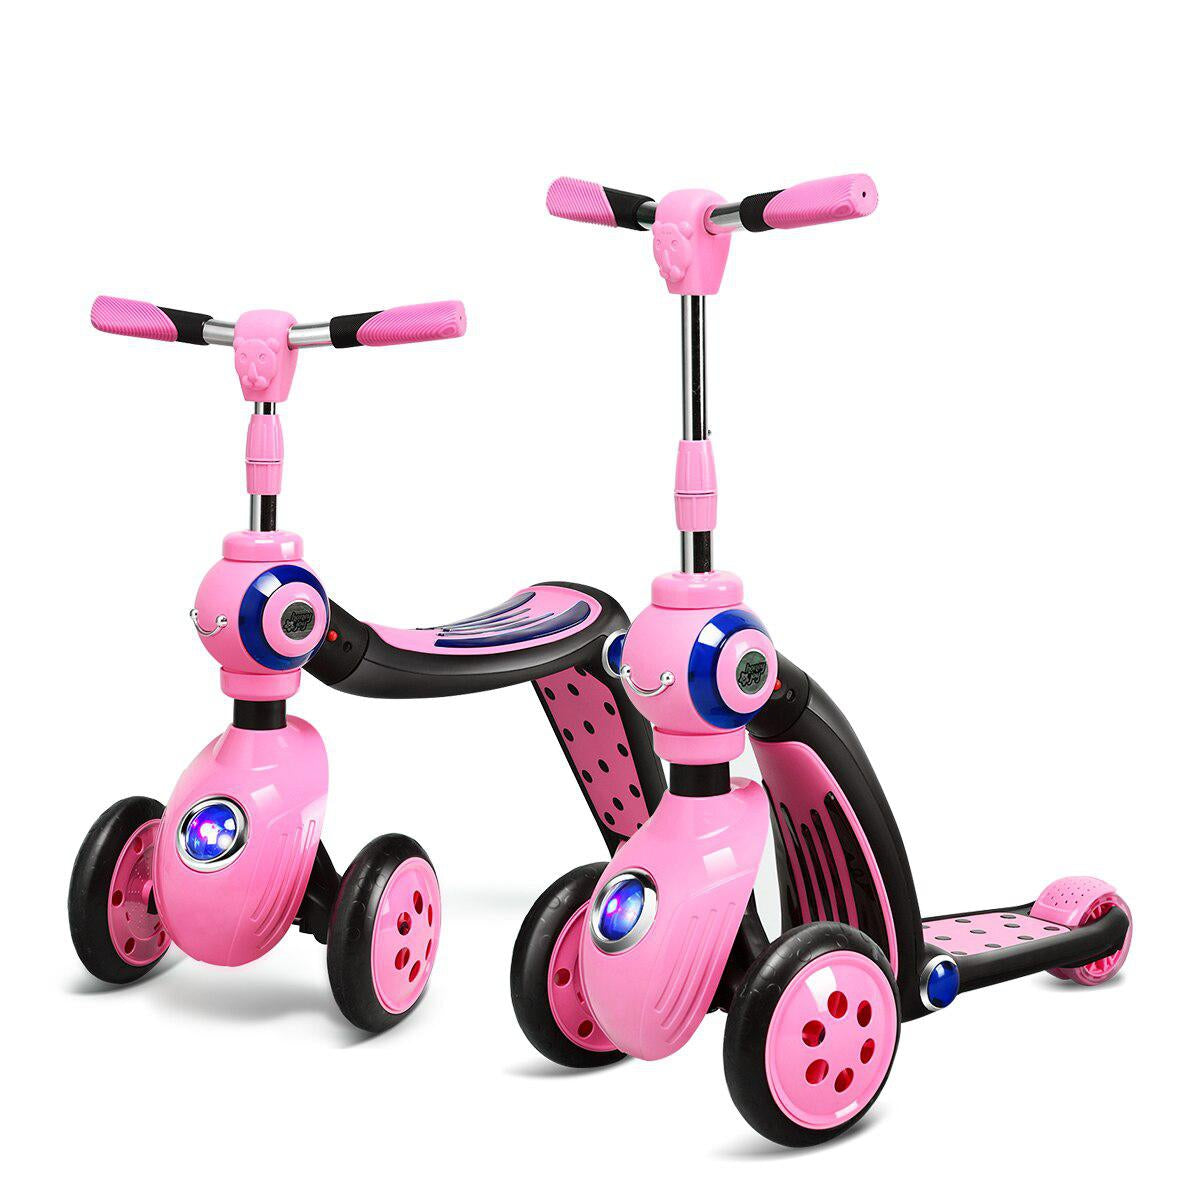 Bikes Scooters & Ride-On Toys